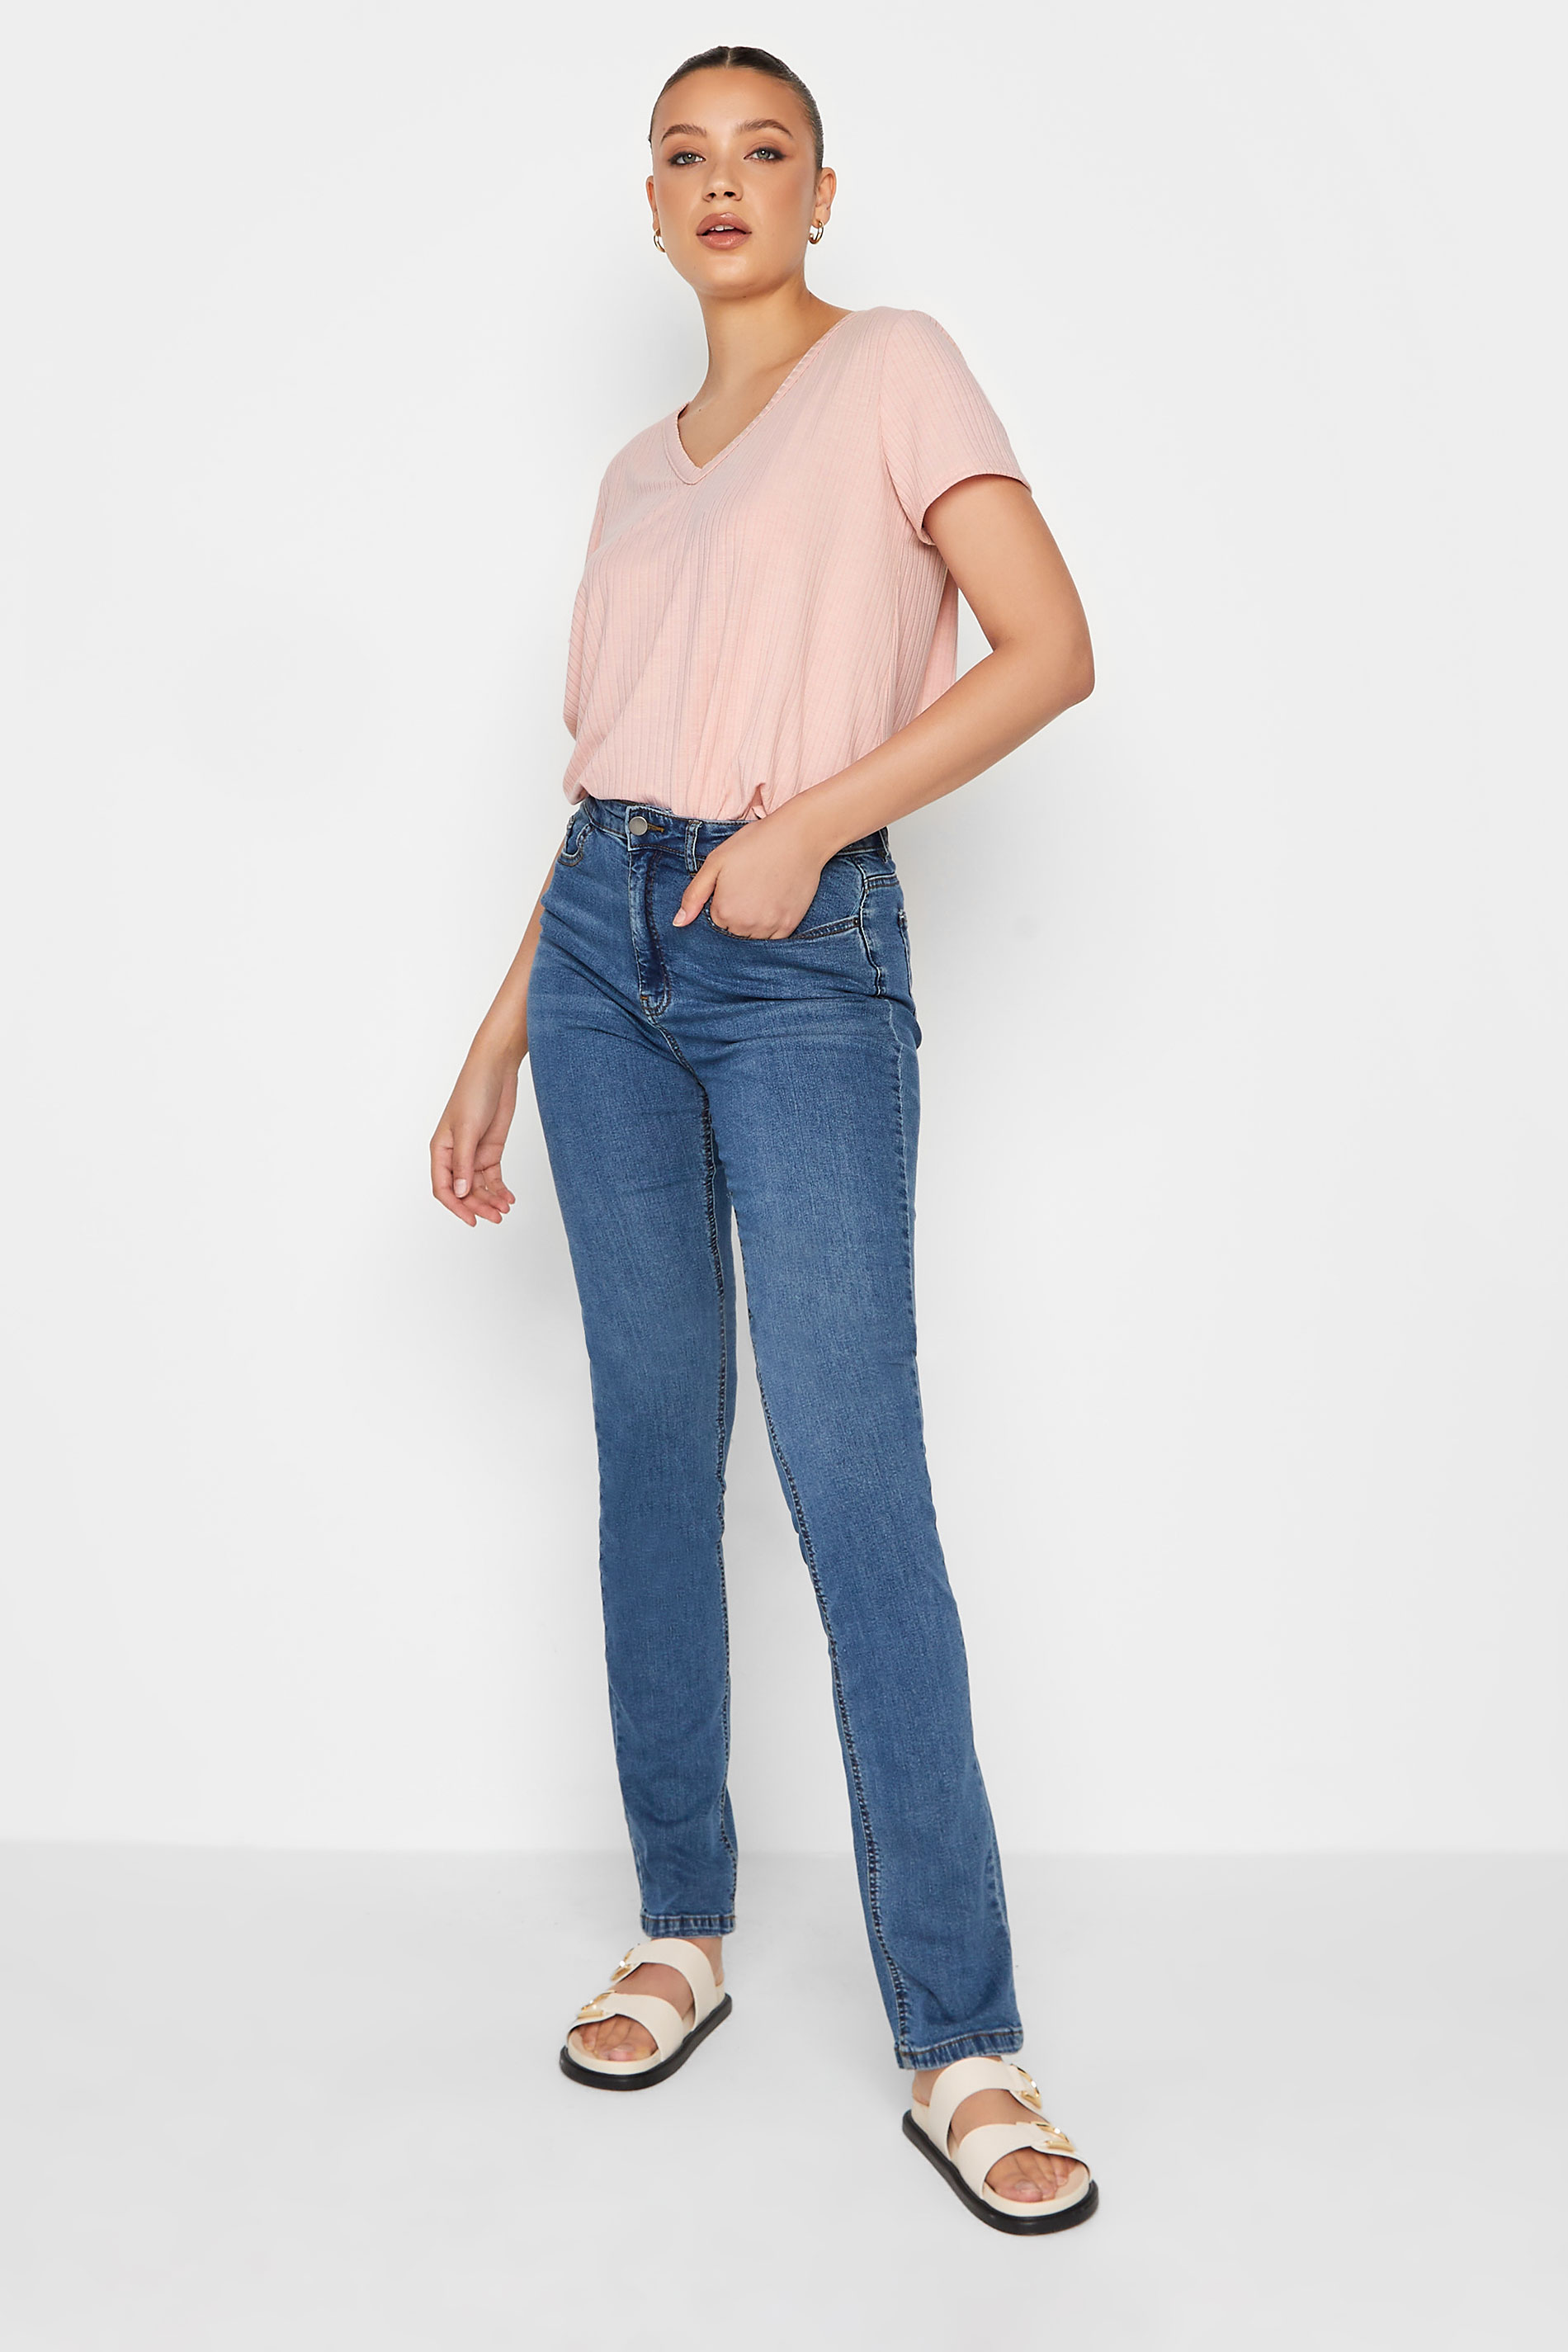 LTS Tall Women's Pink Ribbed V-Neck Swing Top | Long Tall Sally  2